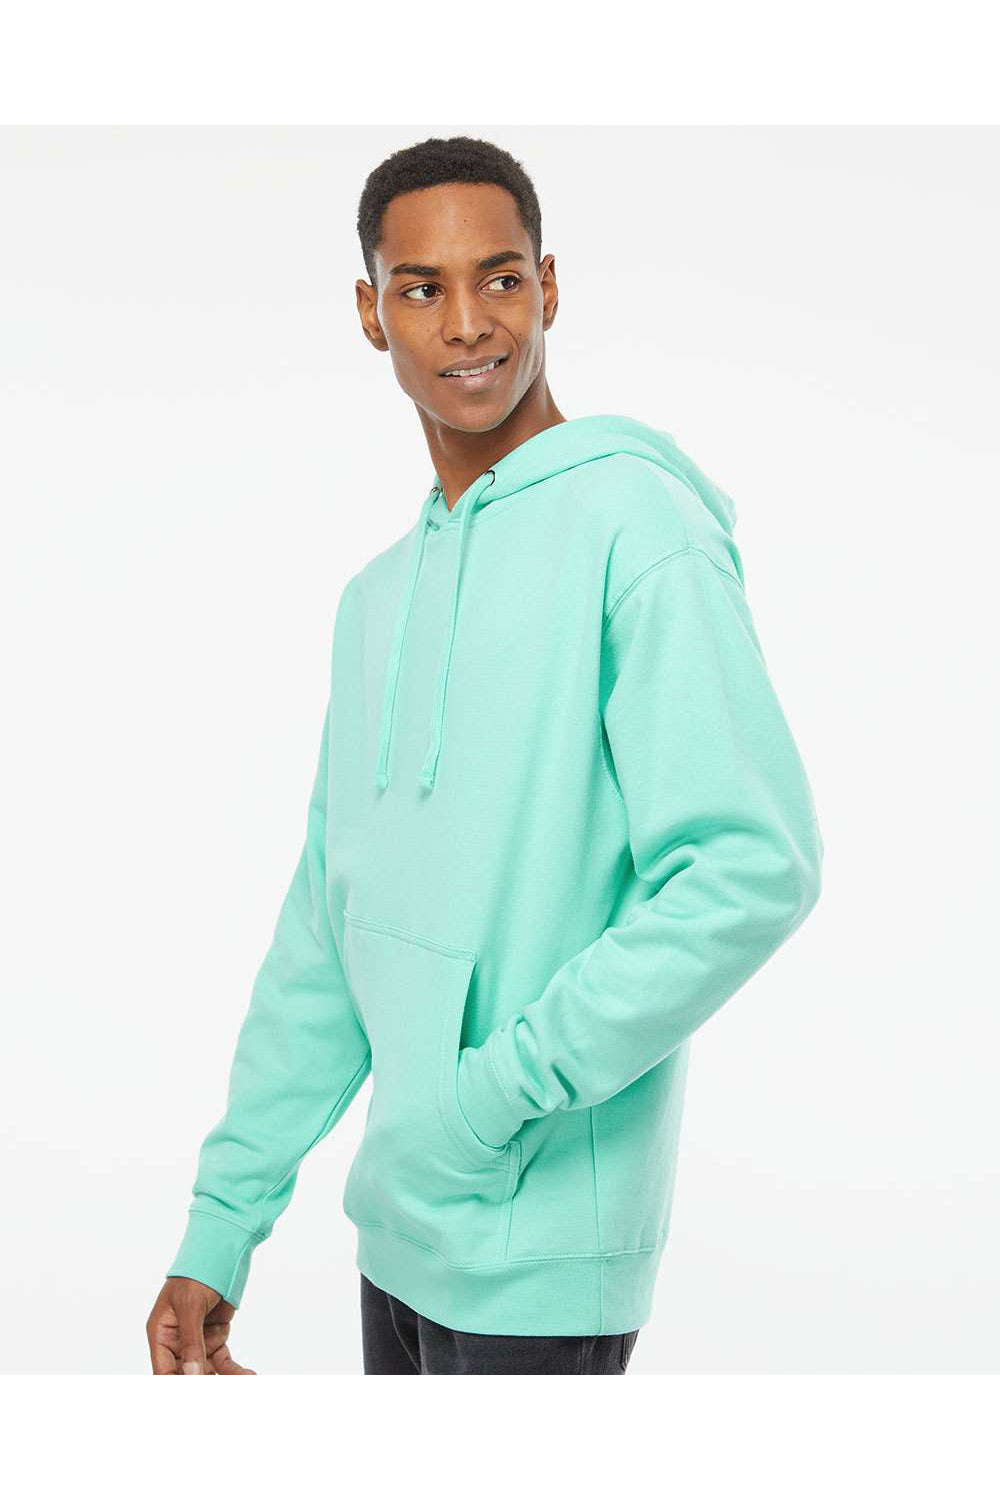 Independent Trading Co. SS4500 Mens Hooded Sweatshirt Hoodie Mint Green Model Side